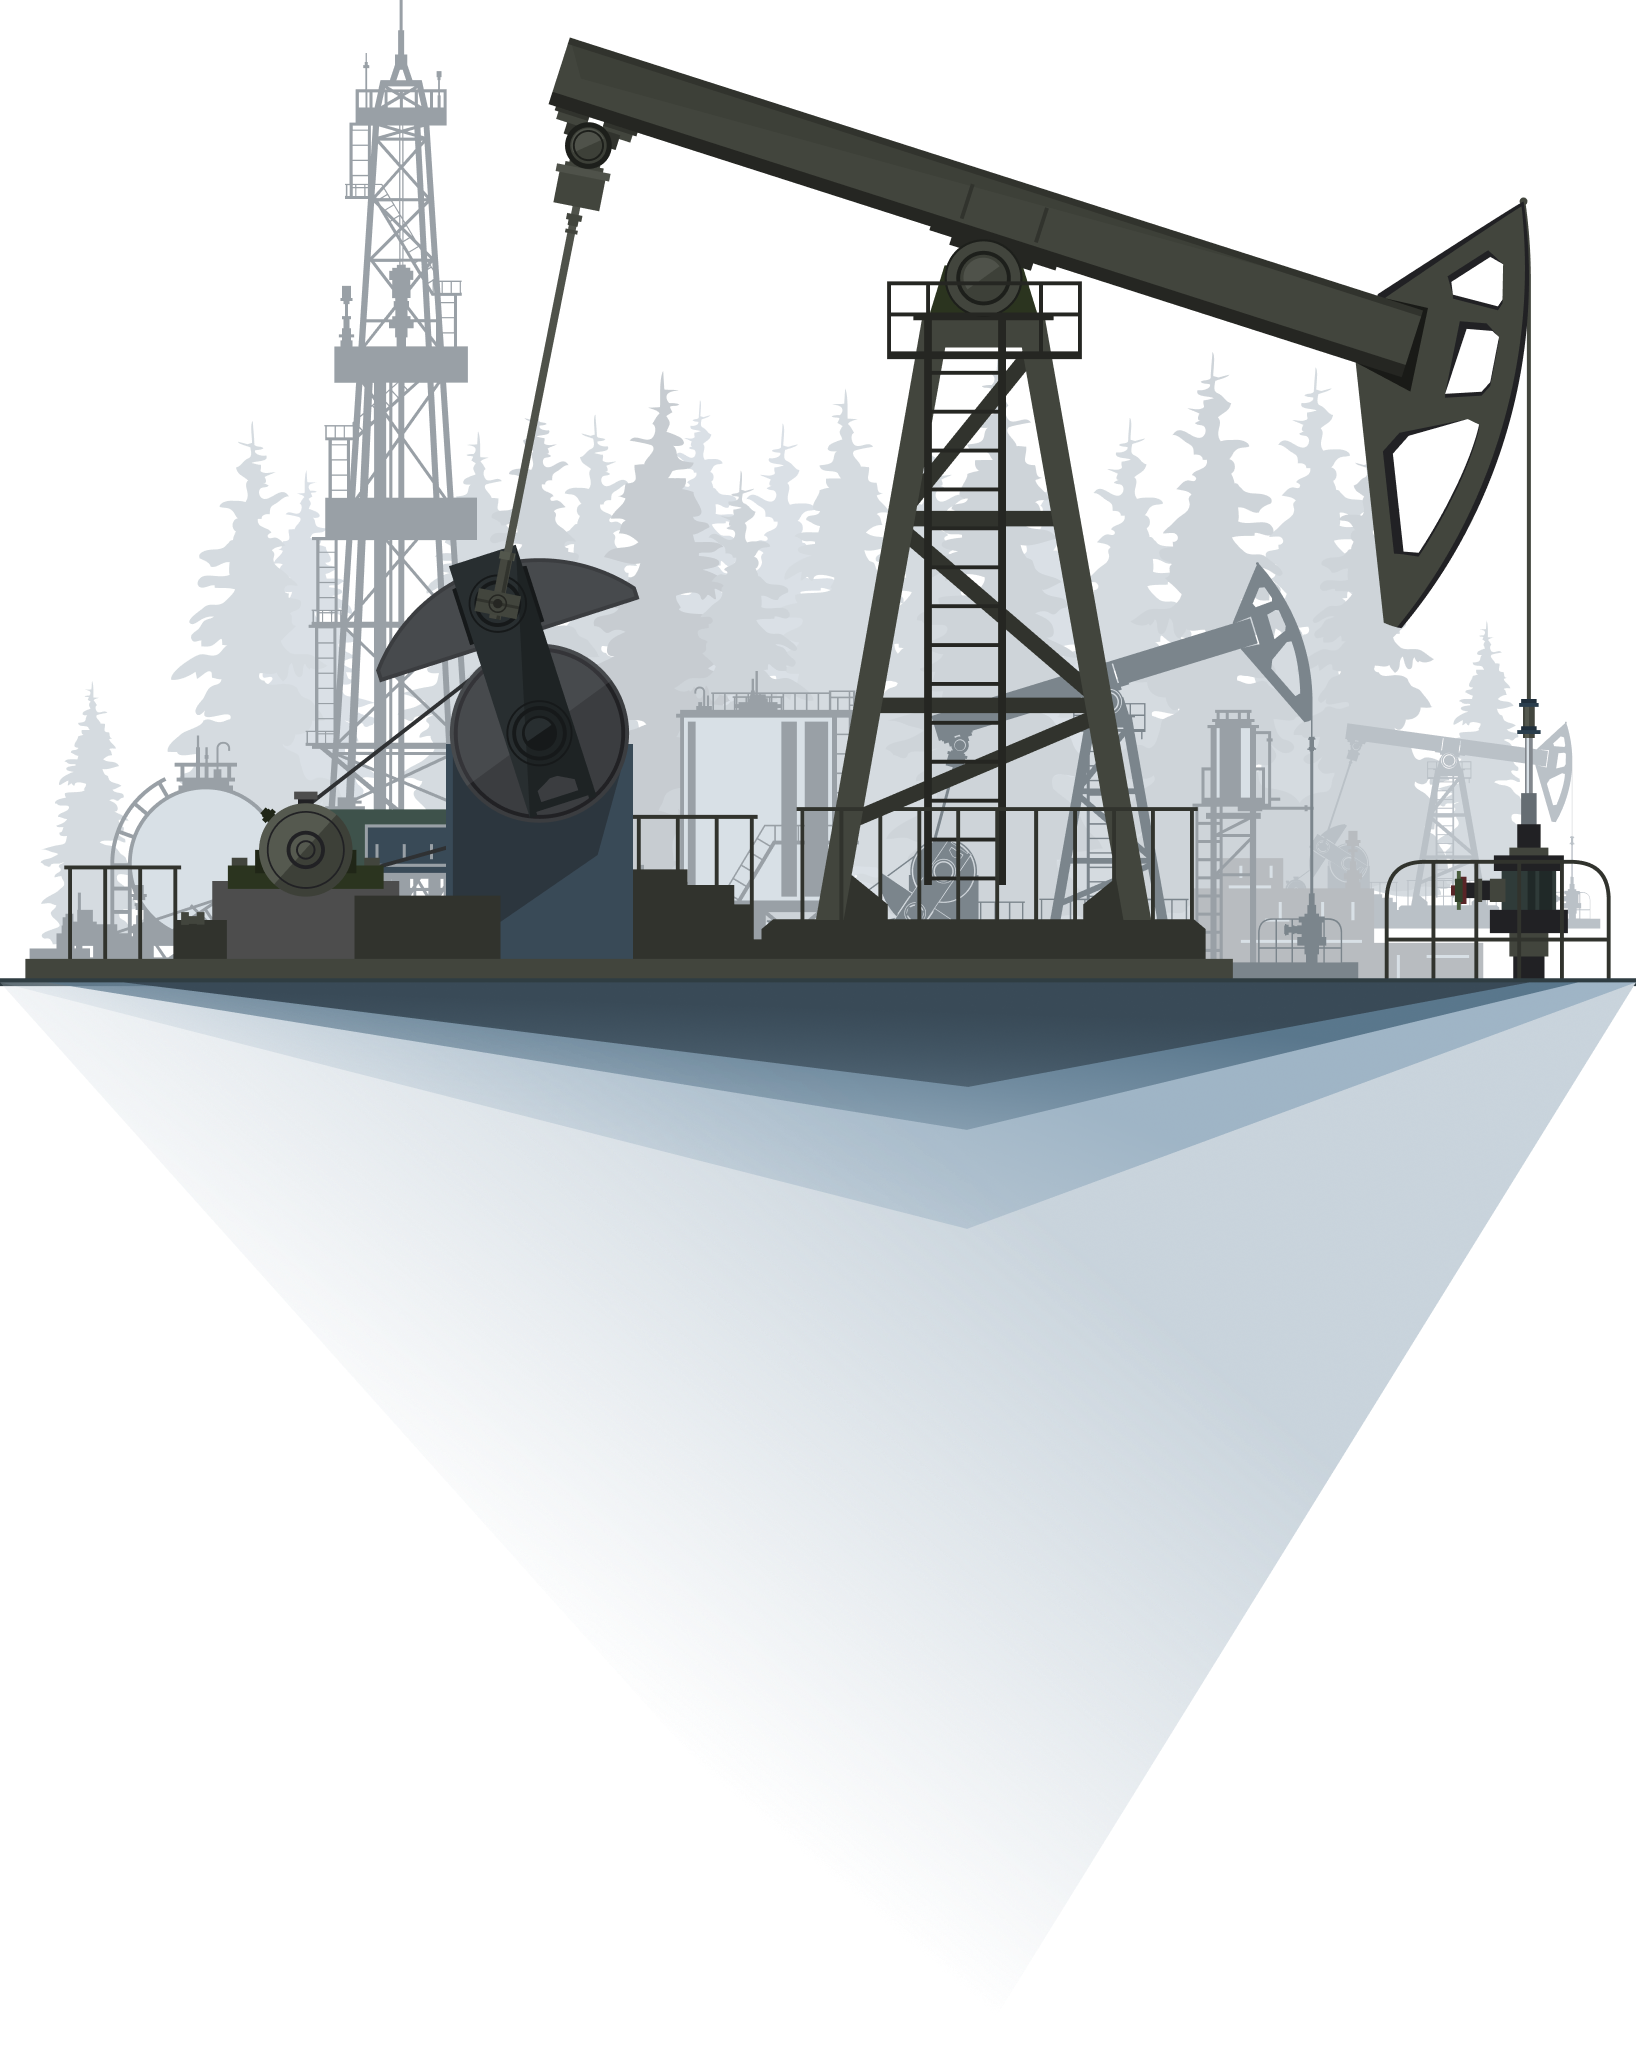 Pumpjack illustration with forest in the background